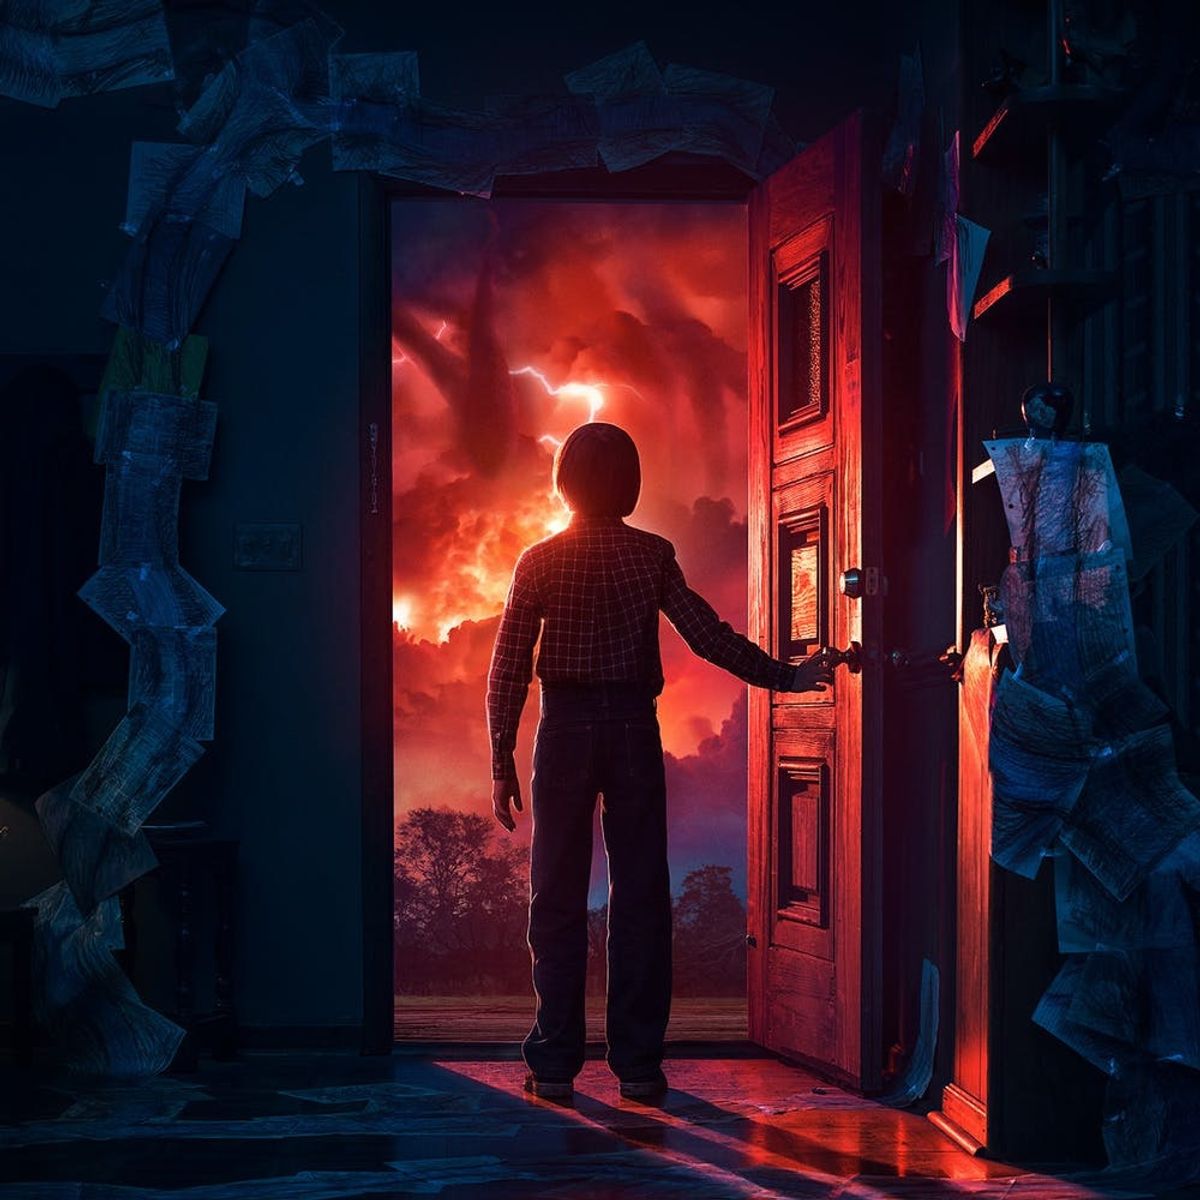 Stranger Things’ Final Season 2 Trailer Is Action-Packed and Beyond Chilling